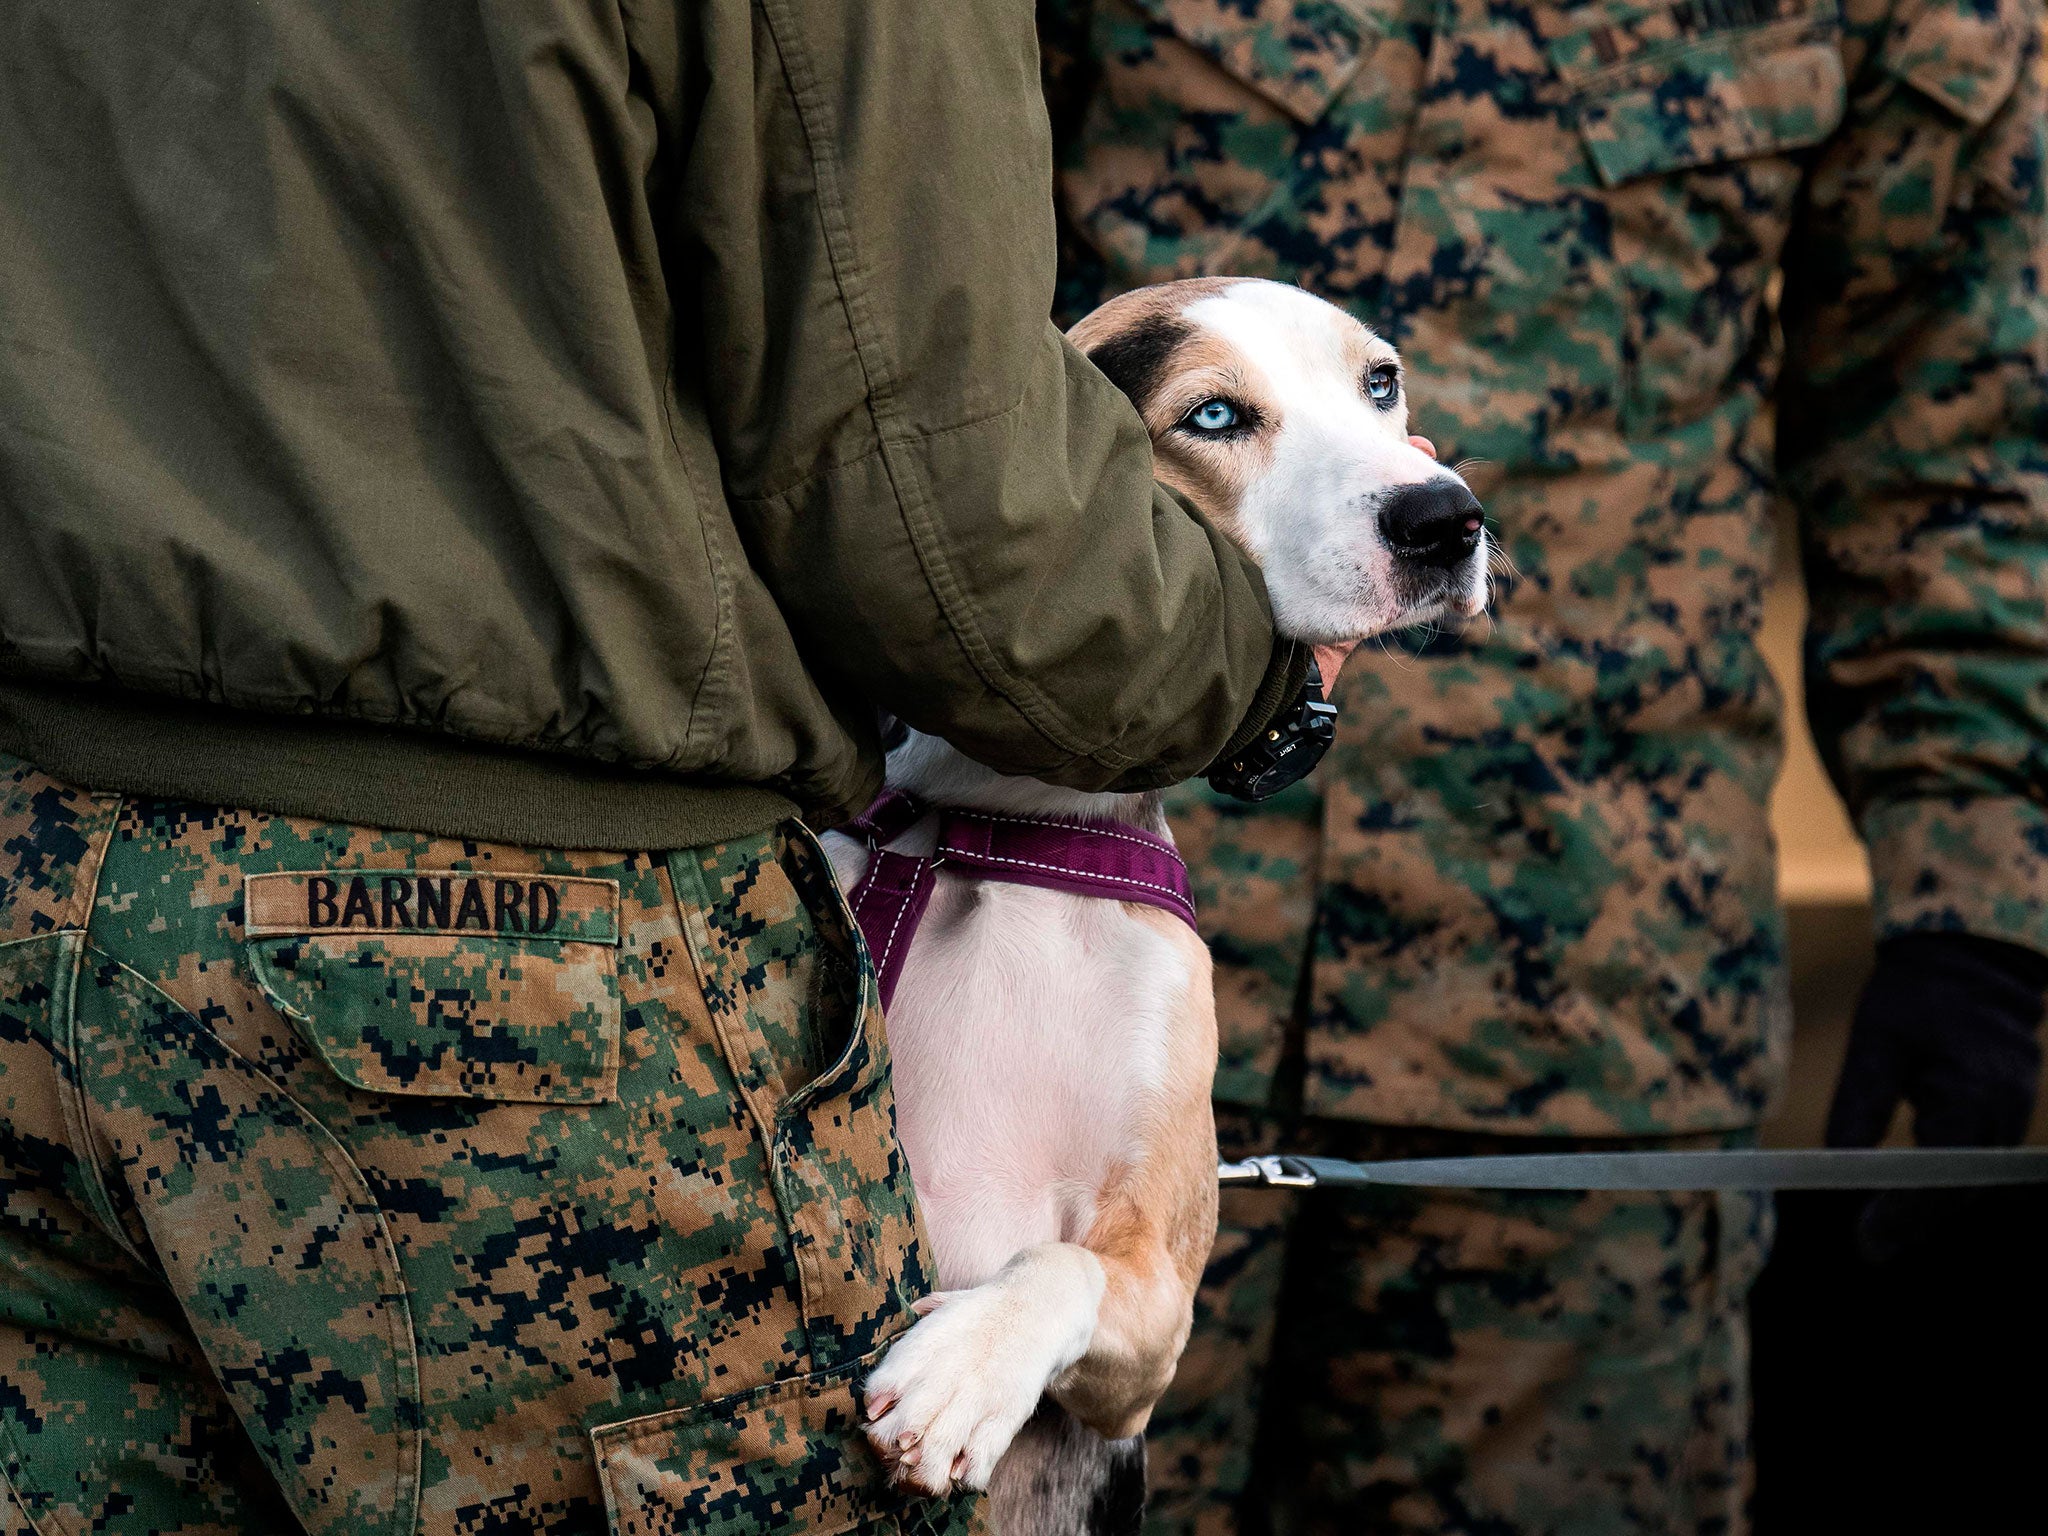 The VA hopes the dog experiments will help its doctors better treat soldiers' severe injuries